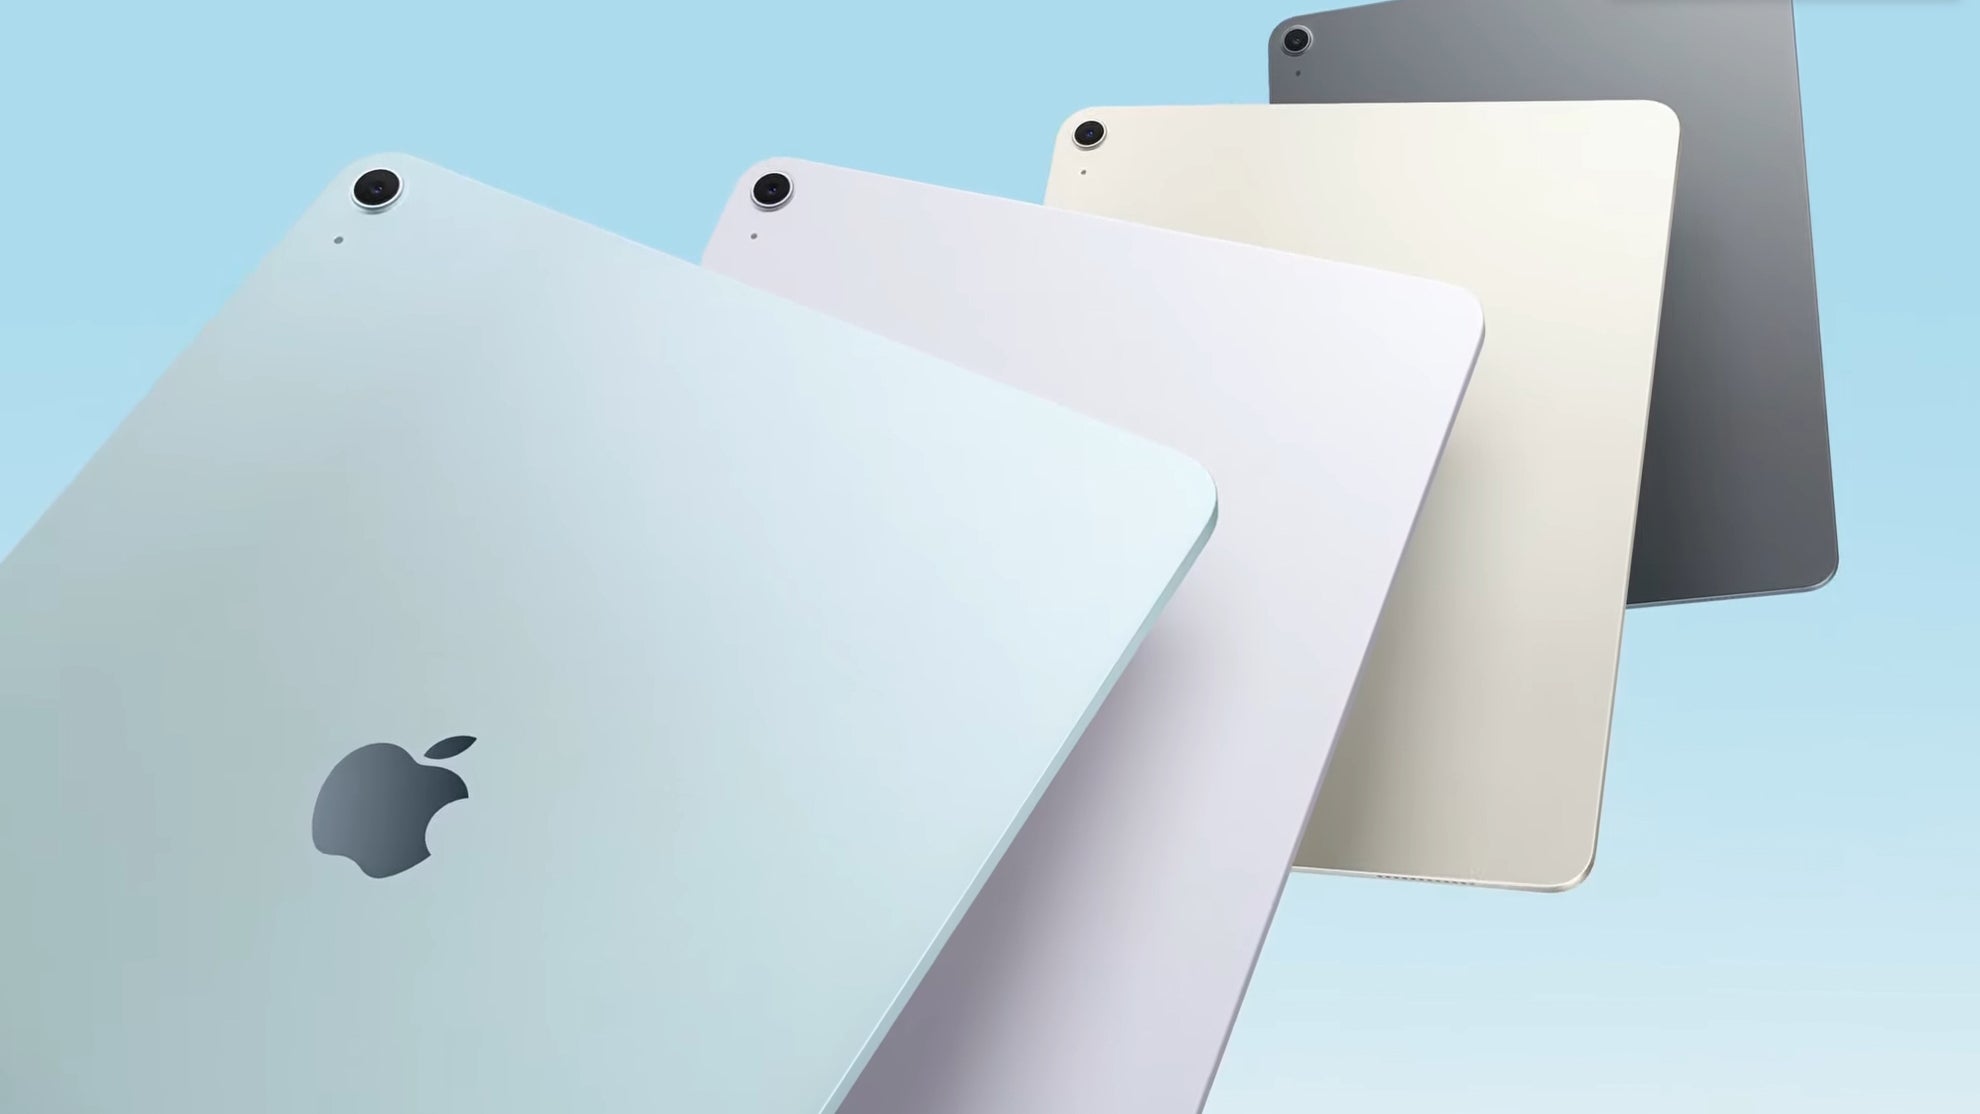 iPad Air 6 (2024) colors. (Image cred - Apple) - iPad Air 6 (2024) Preview: new chip, new size option, and...?